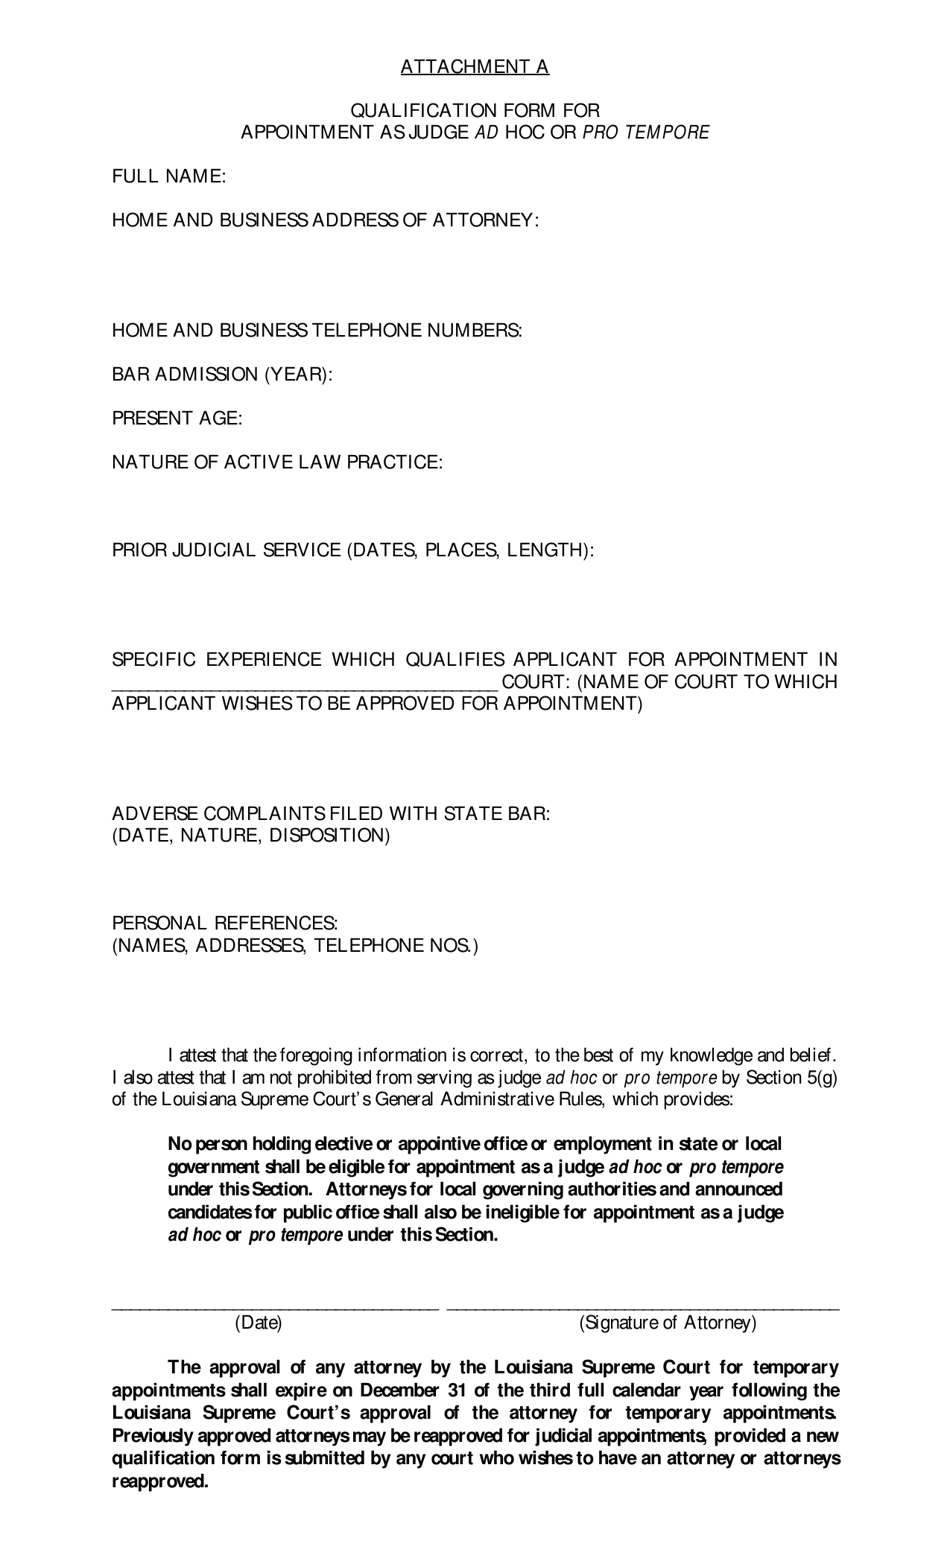 Attachment A Qualification Form for Appointment as Judge Ad Hoc or Pro Tempore - Louisiana, Page 1